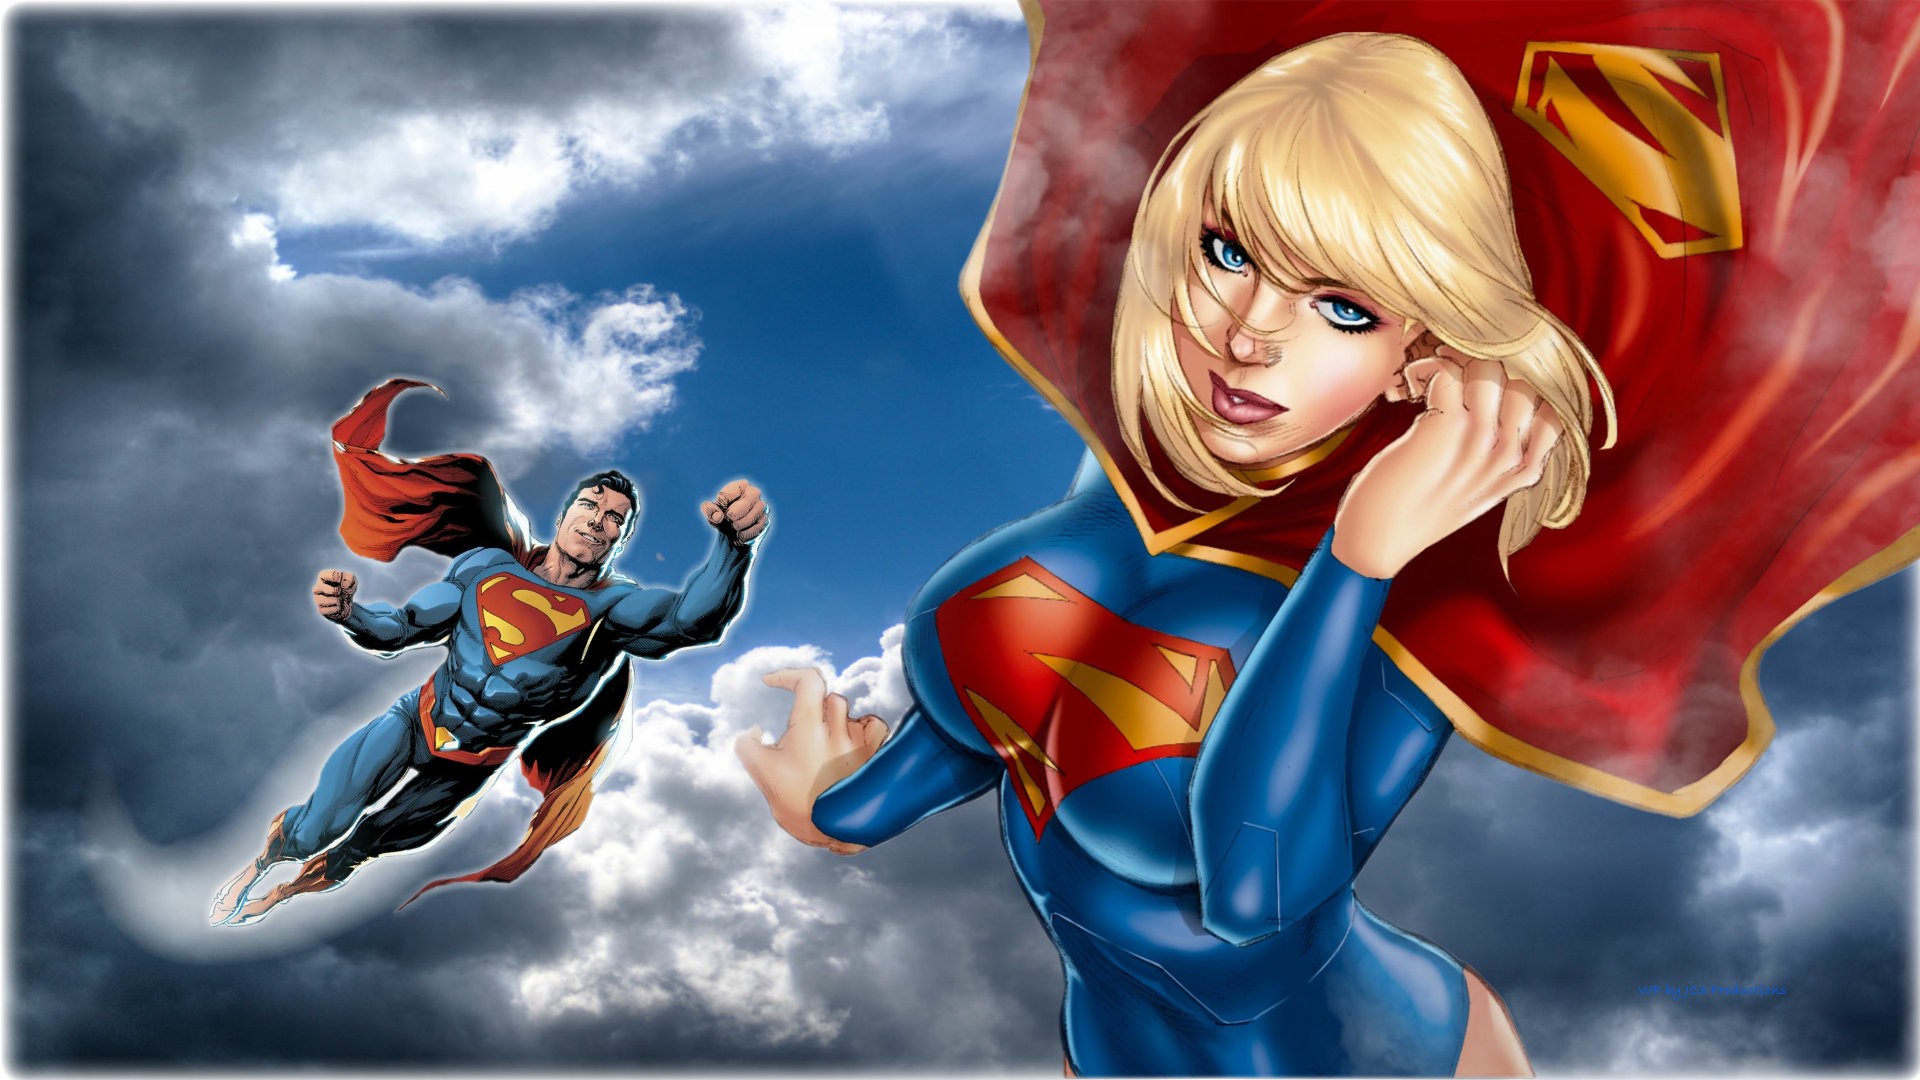 1920x1080 DC Comics images Superman Supergirl In The Clouds 4 HD wallpaper and  background photos